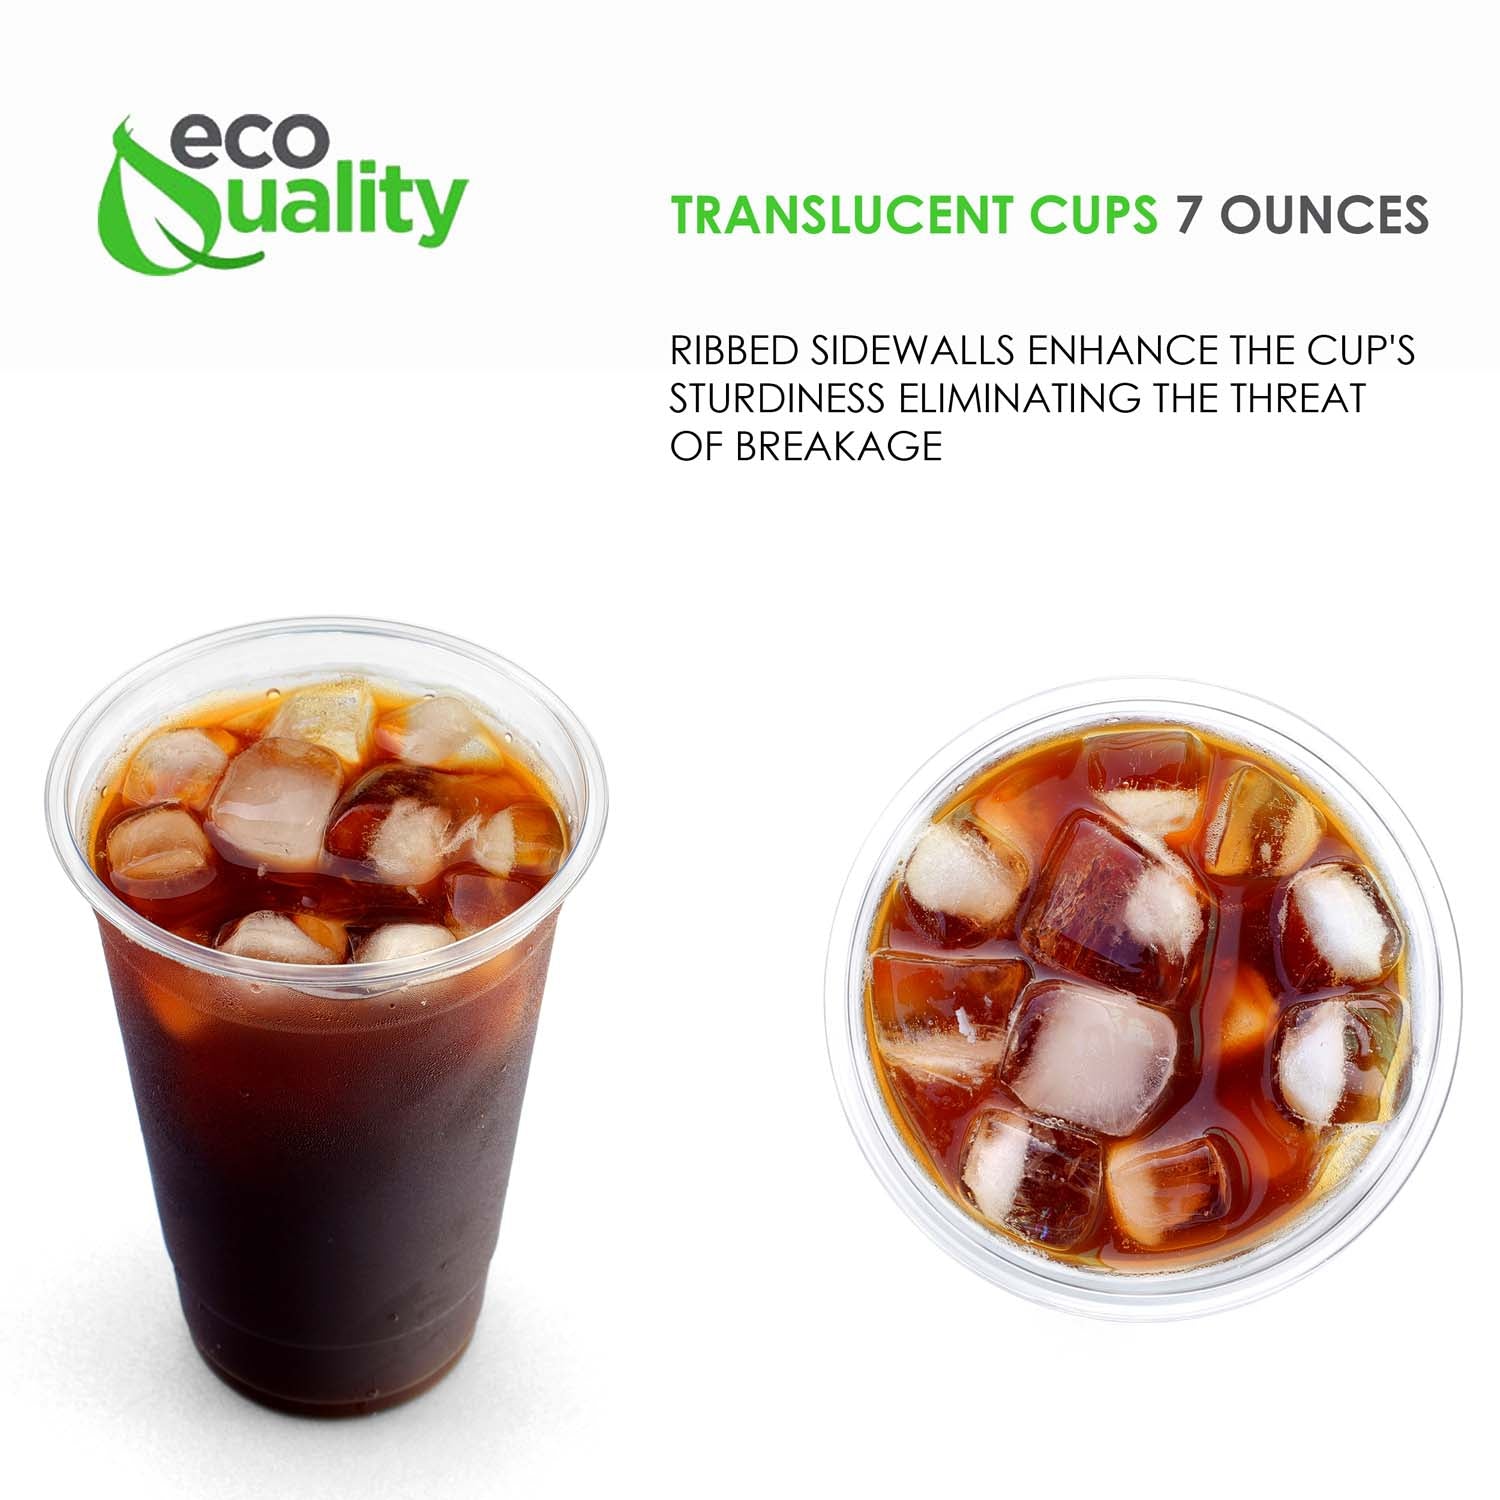 7 Ounces  BBQ Cups  Clear Cups  Party Cups  Cold Drink Cups  Soda Plastic Cups  Translucent Plastic Cups  Translucent Cups  translucent  Plastic Cups  disposable plastic cups  Clear Plastic Cups  7 oz